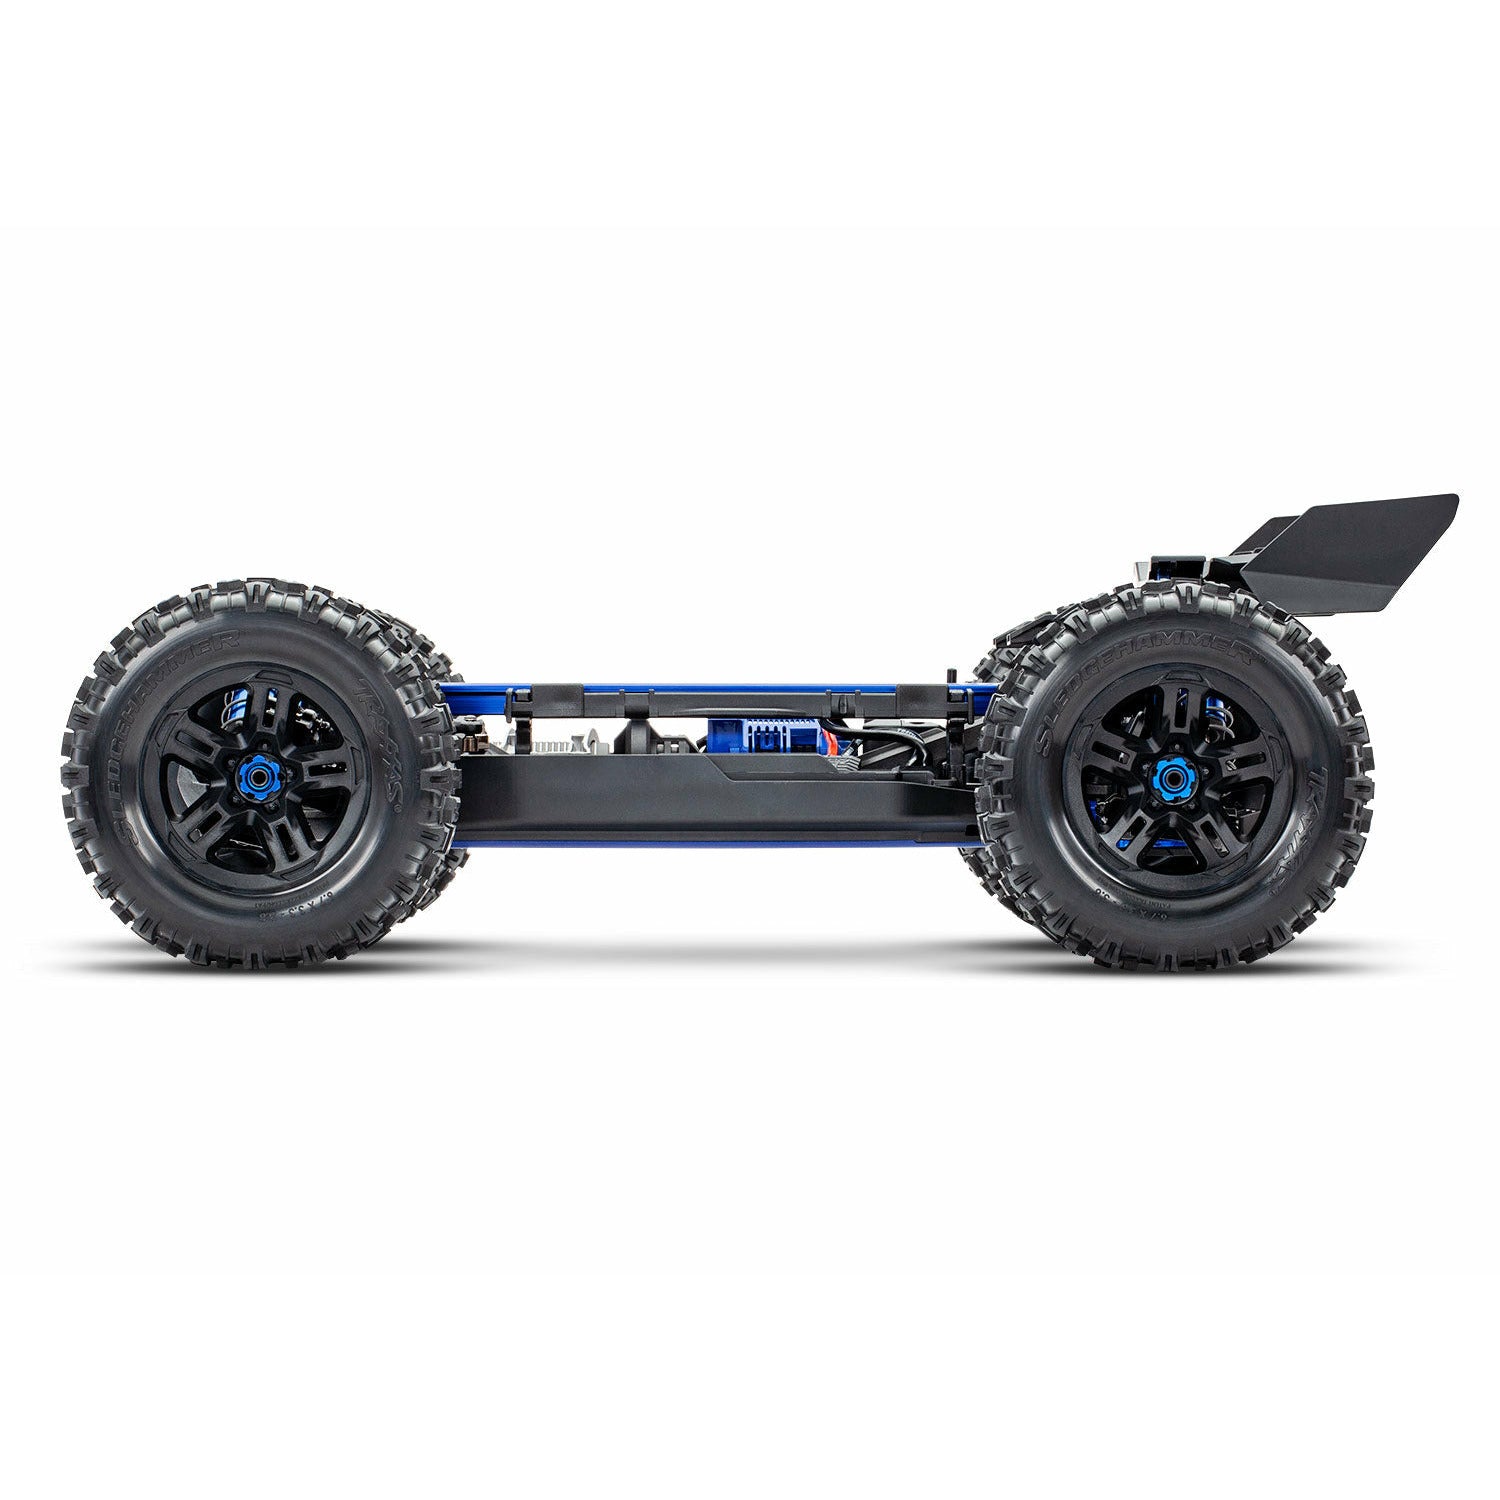 TRAXXAS Sledge Belted 1/8 Scale 4WD Brushless Electric Monster Truck - Orange